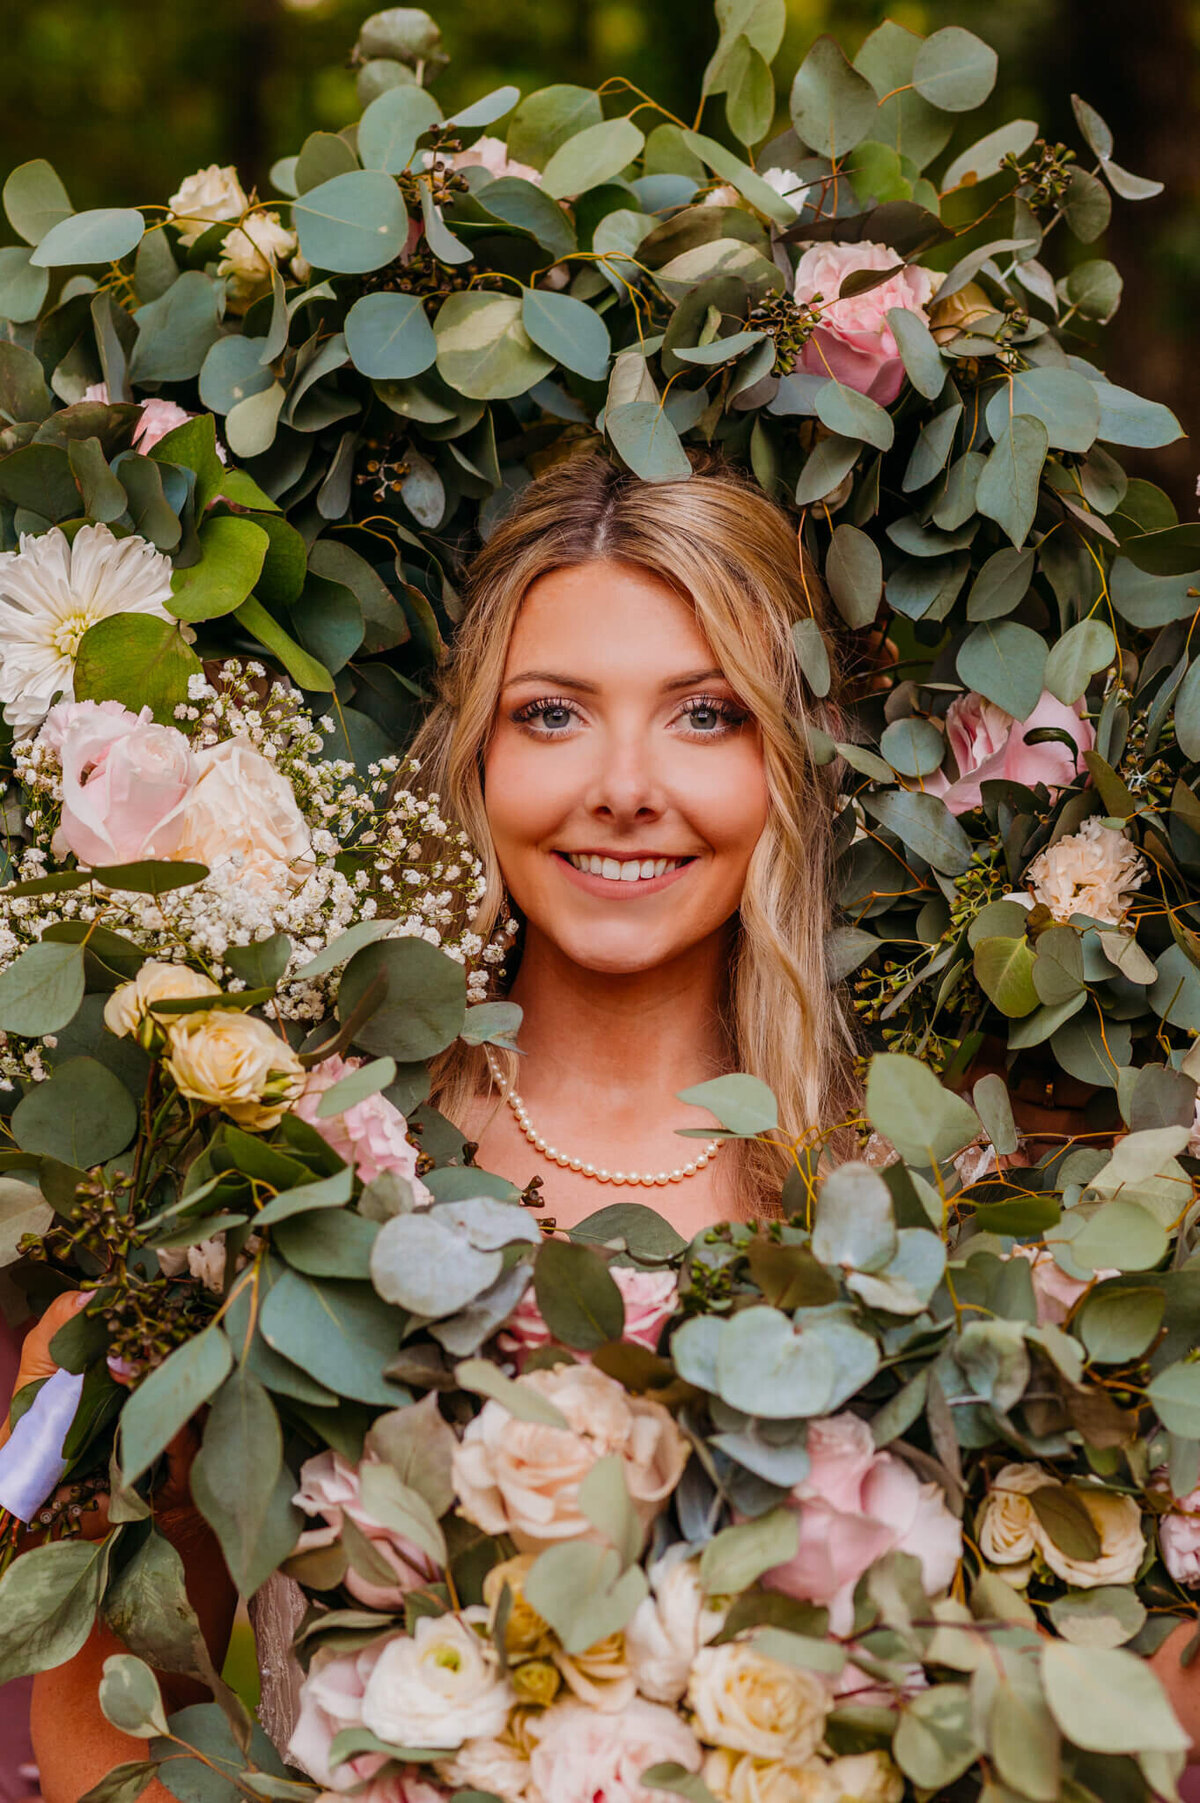 photo a bride wearing a Pearl necklace andsmiling while greenery and florals around her face